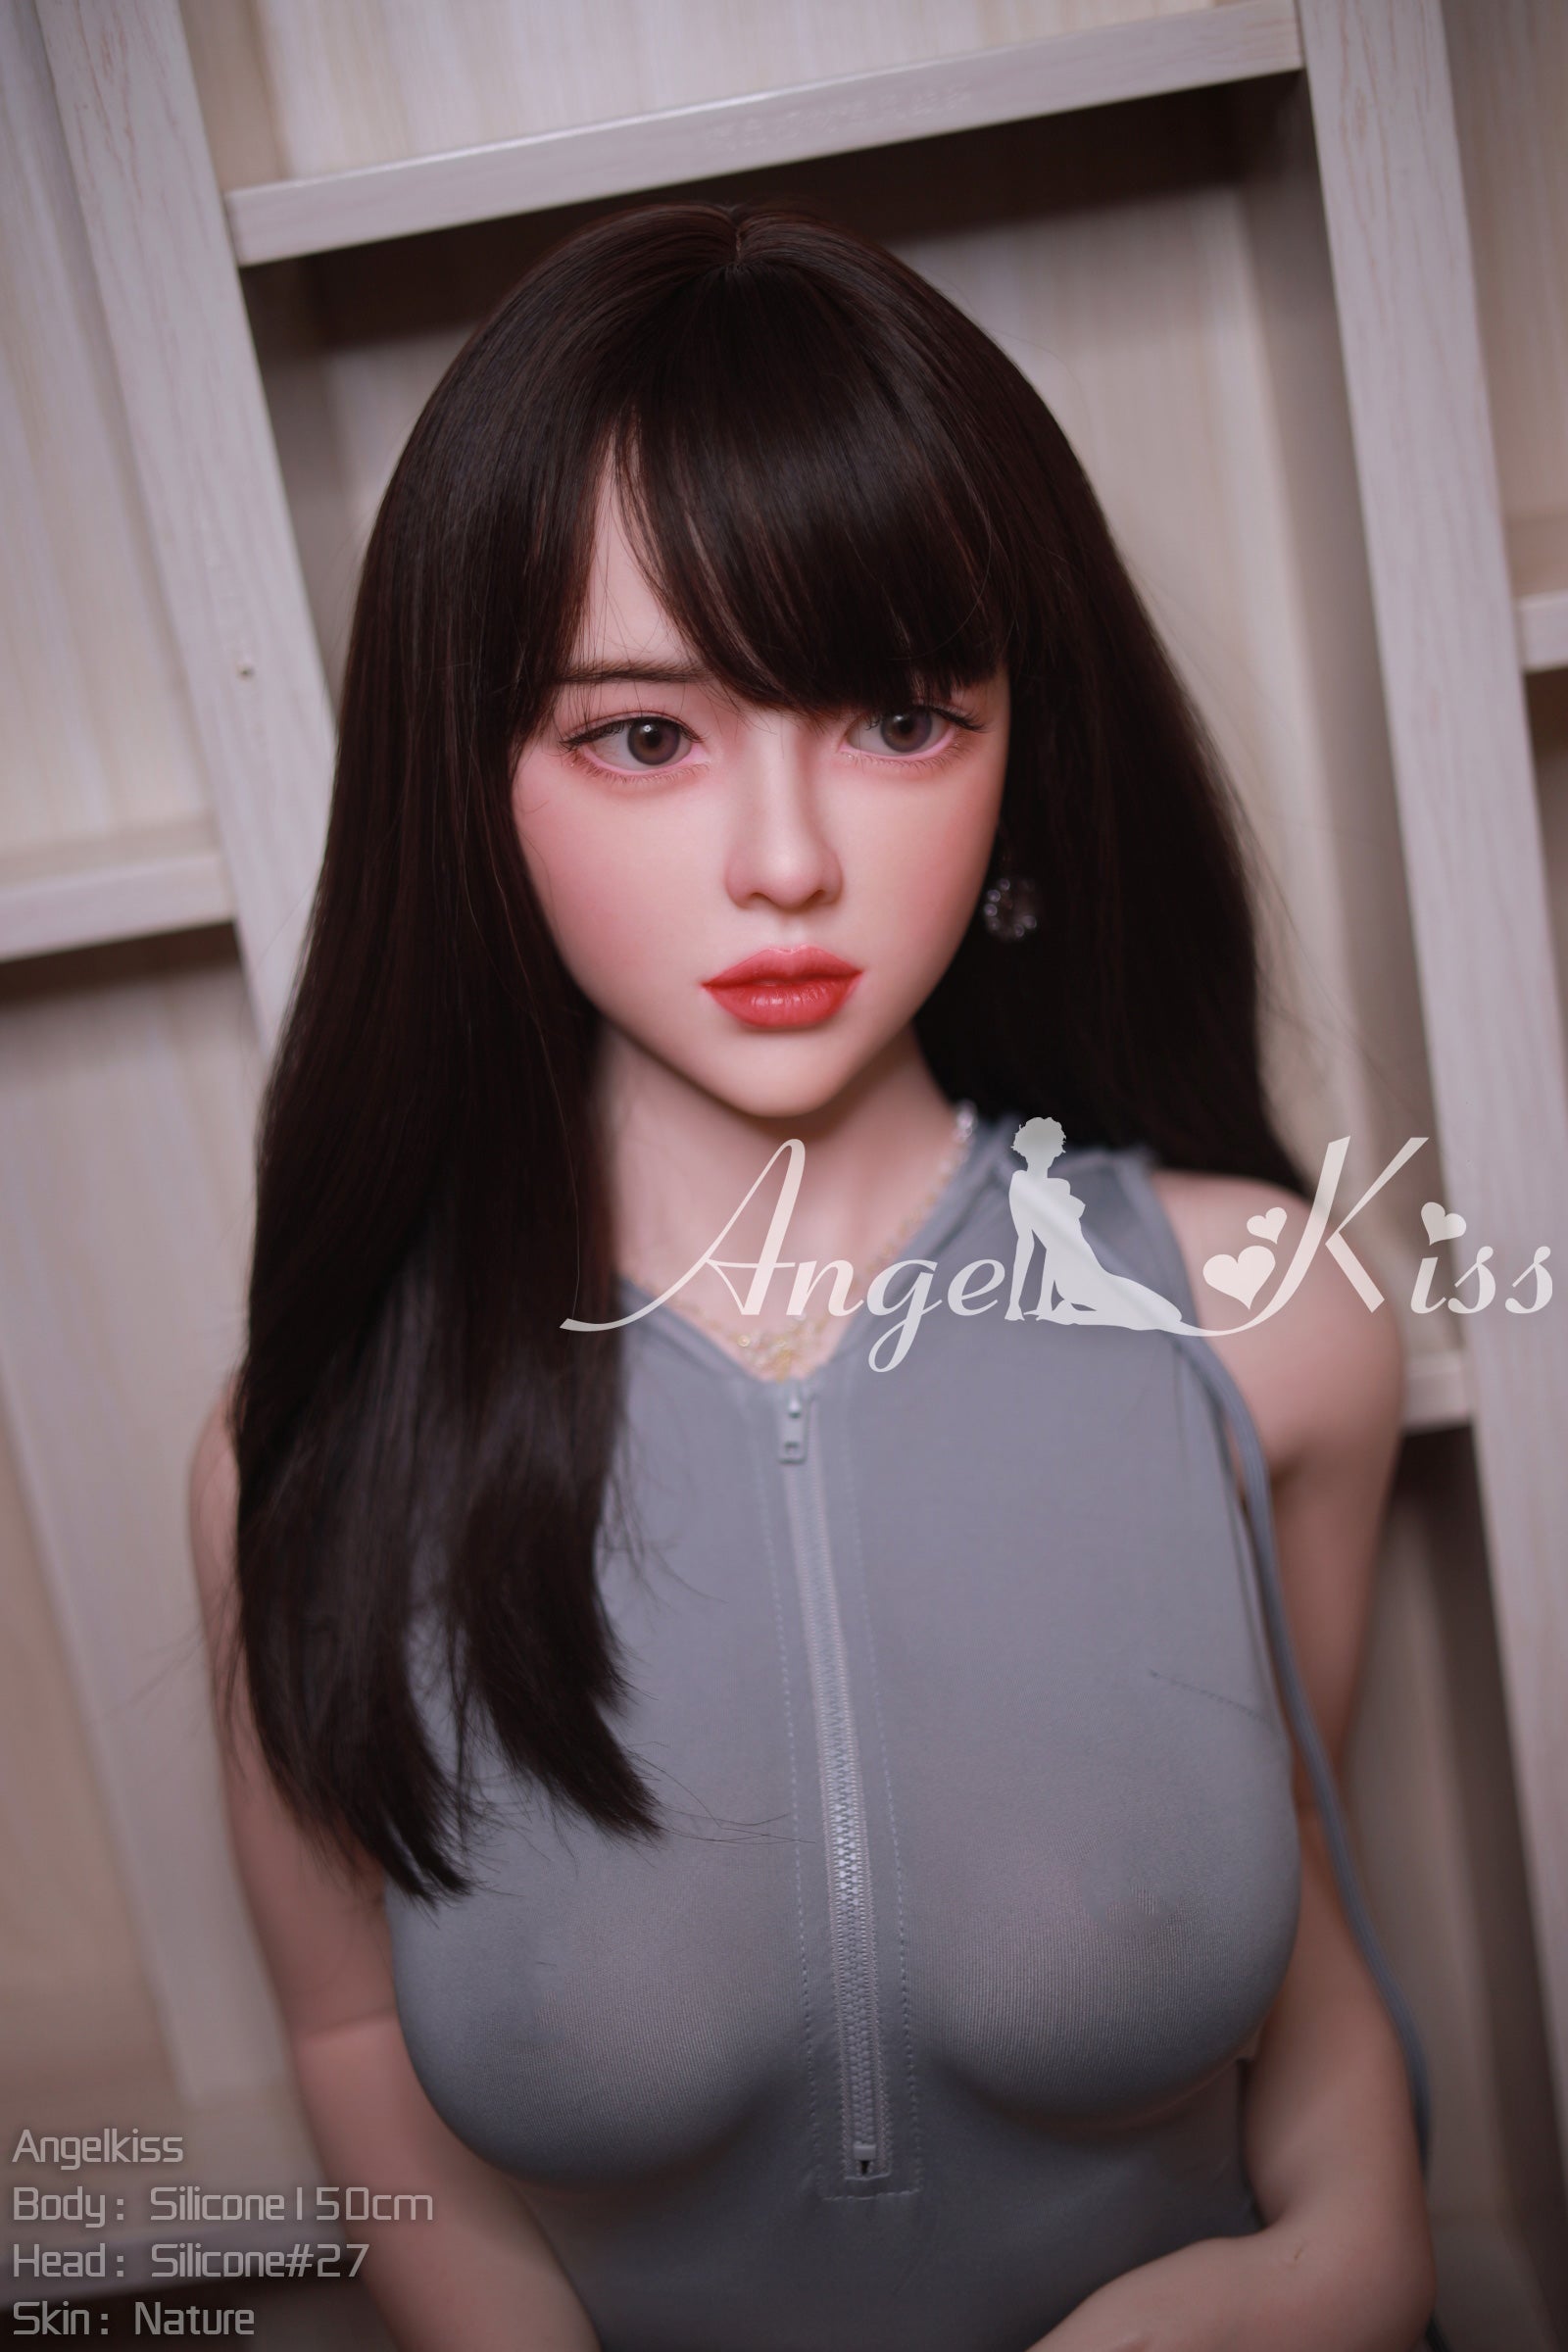 Angelkiss Doll 150 cm Silicone - Ying | Buy Sex Dolls at DOLLS ACTUALLY